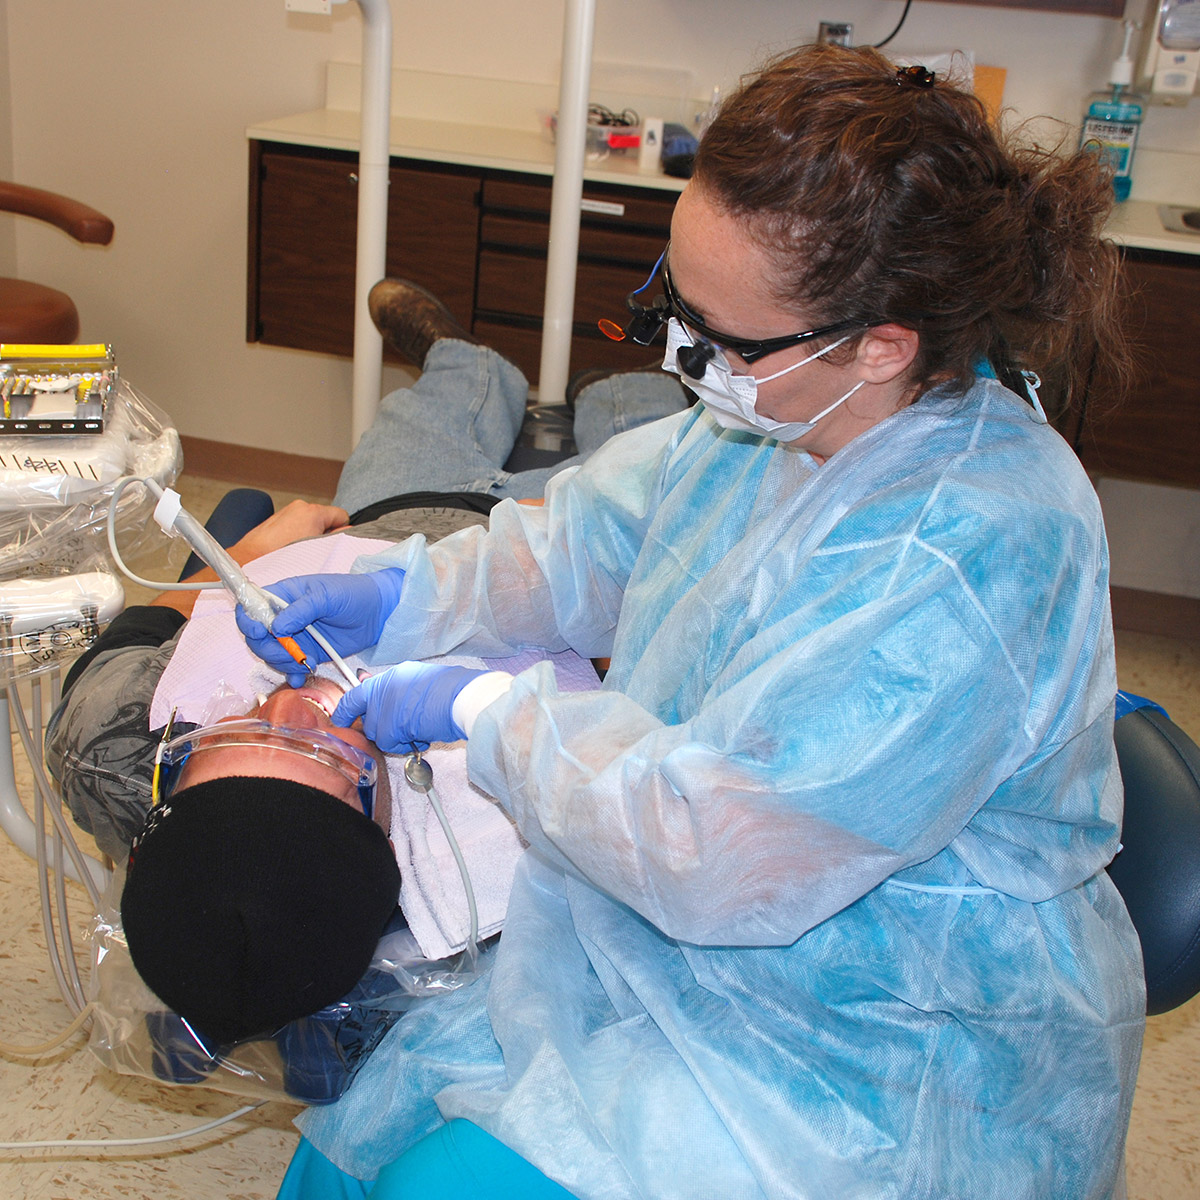 CCD Dental Hygiene student with a patient